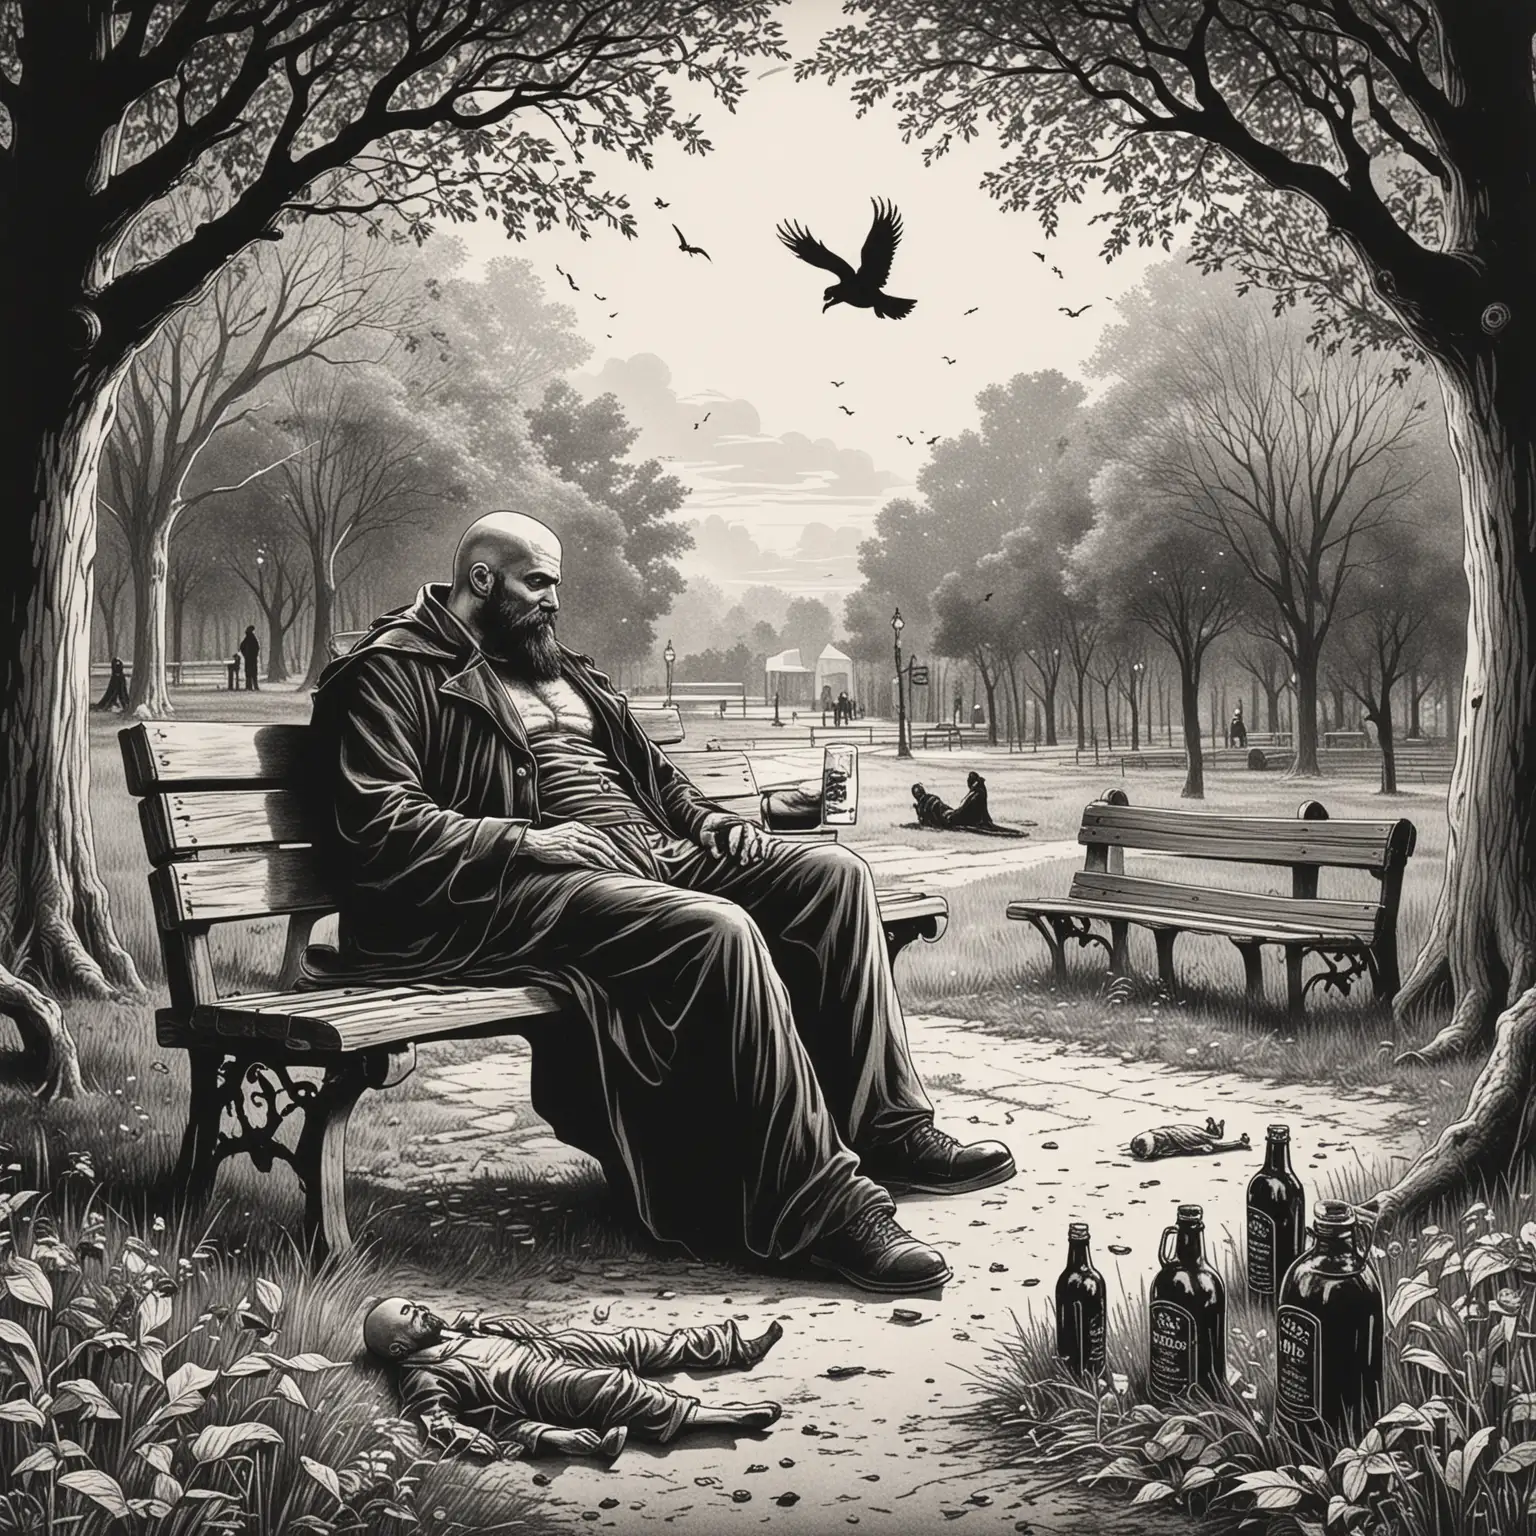 A Bald man with a beard and the grim reaper sleeping on a bench in a park, beer bottles on the ground, album cover, fine liner black ink, silhouette